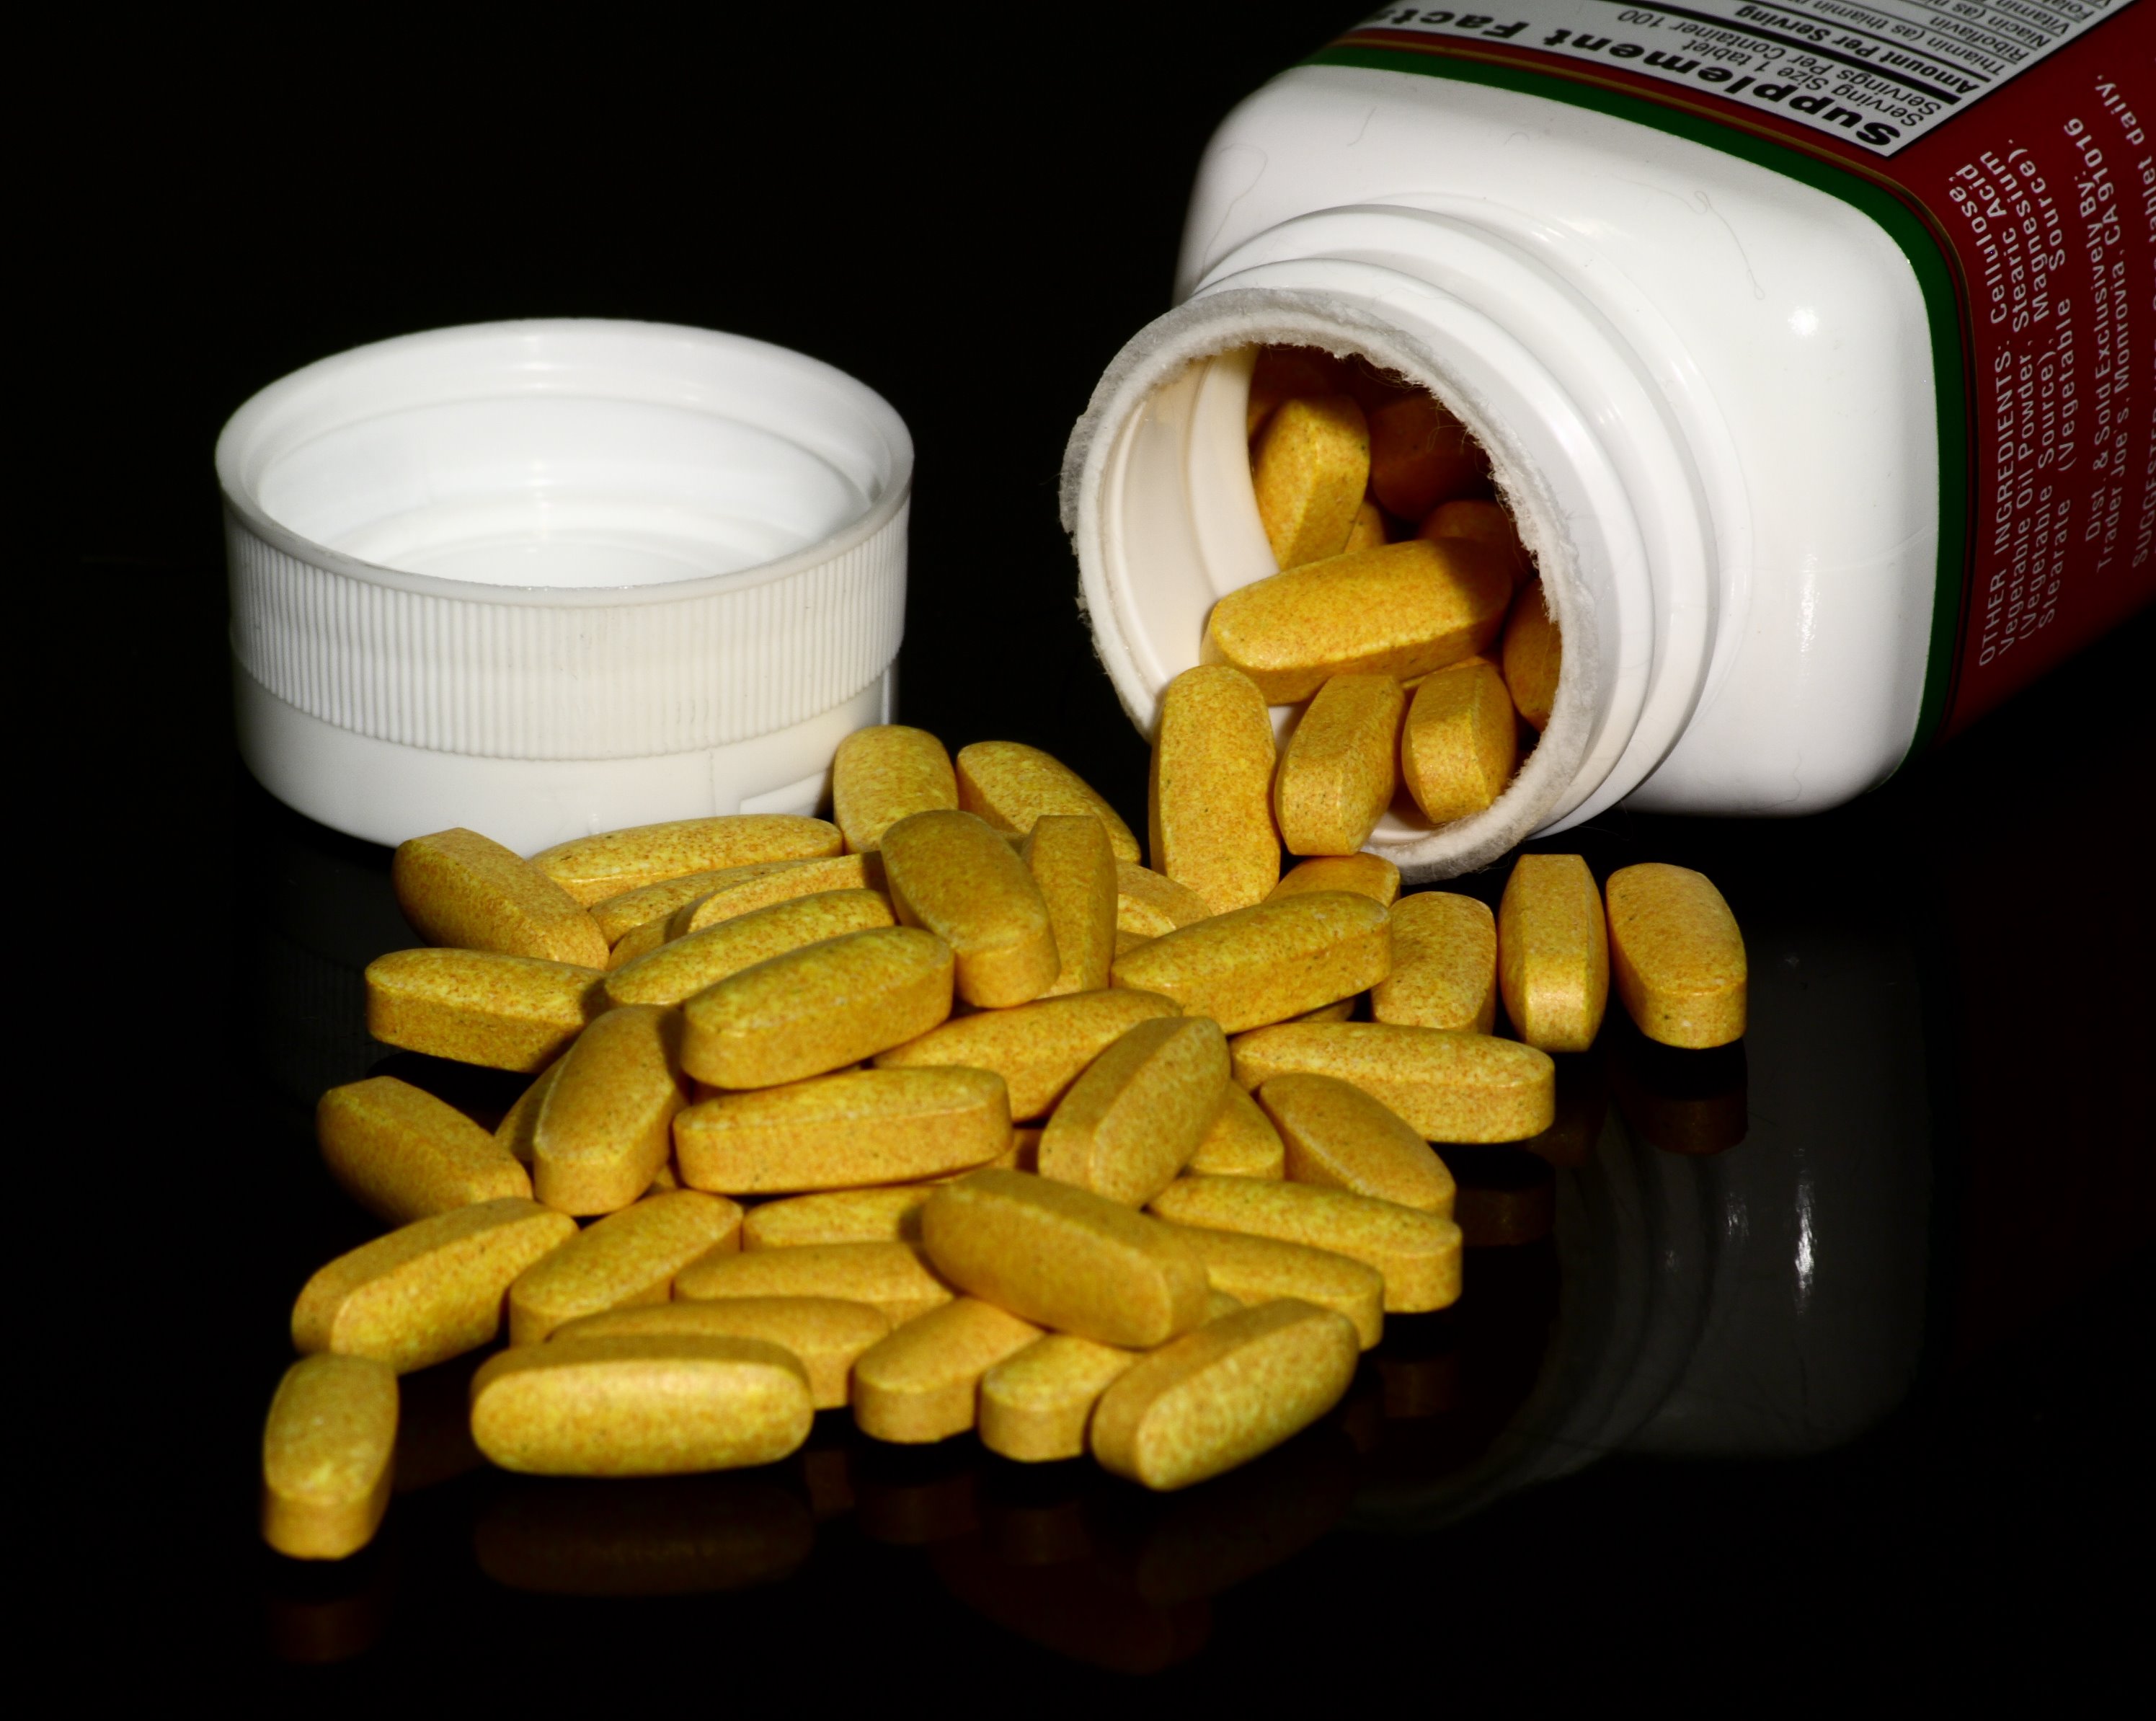 What Can a Hydroxocobalamin Supplement Do For Me?